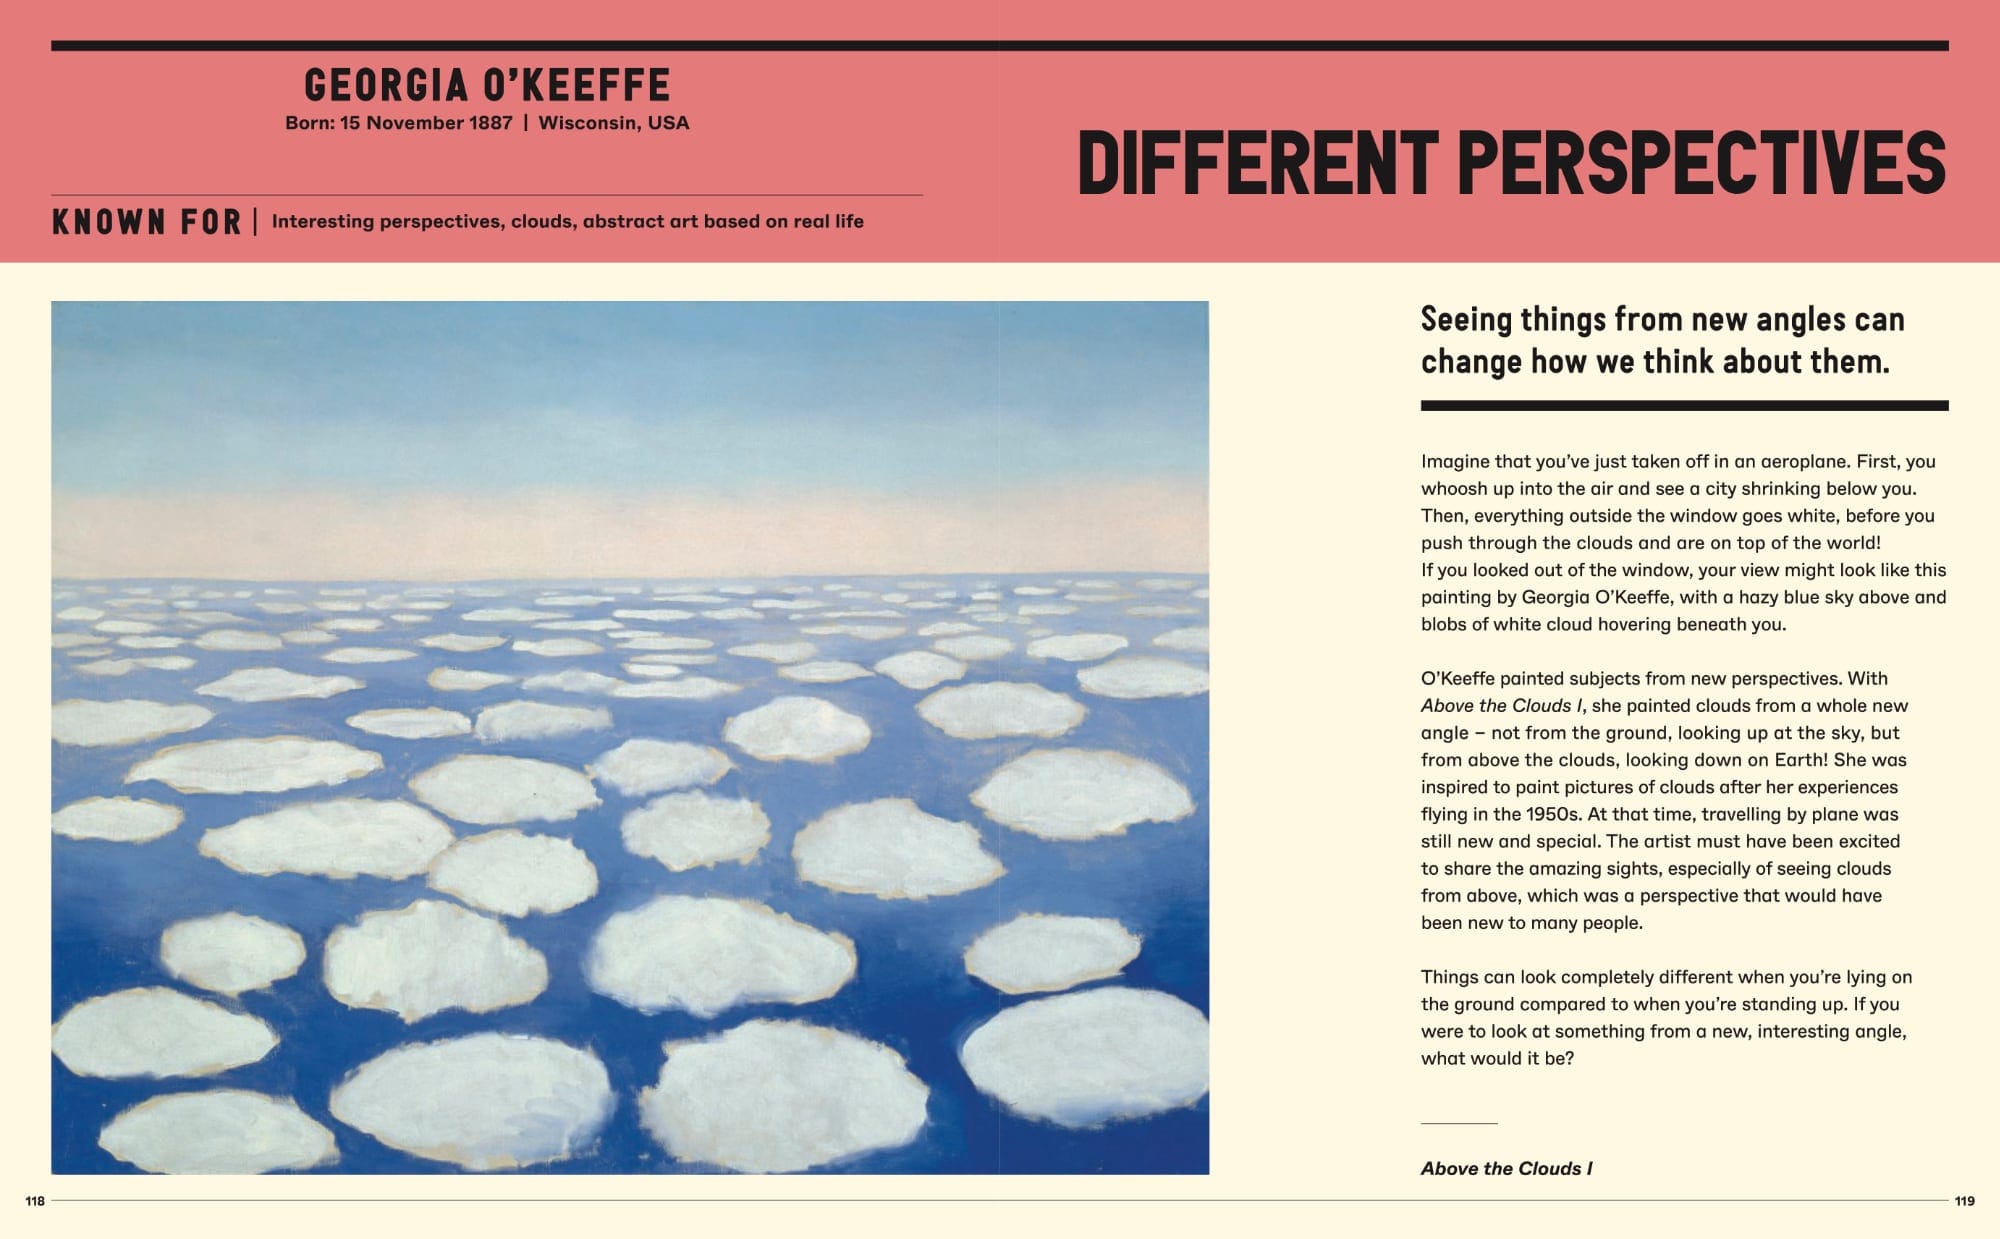 a book spread featuring a cloud work by Georgia O'keefe with text about the piece